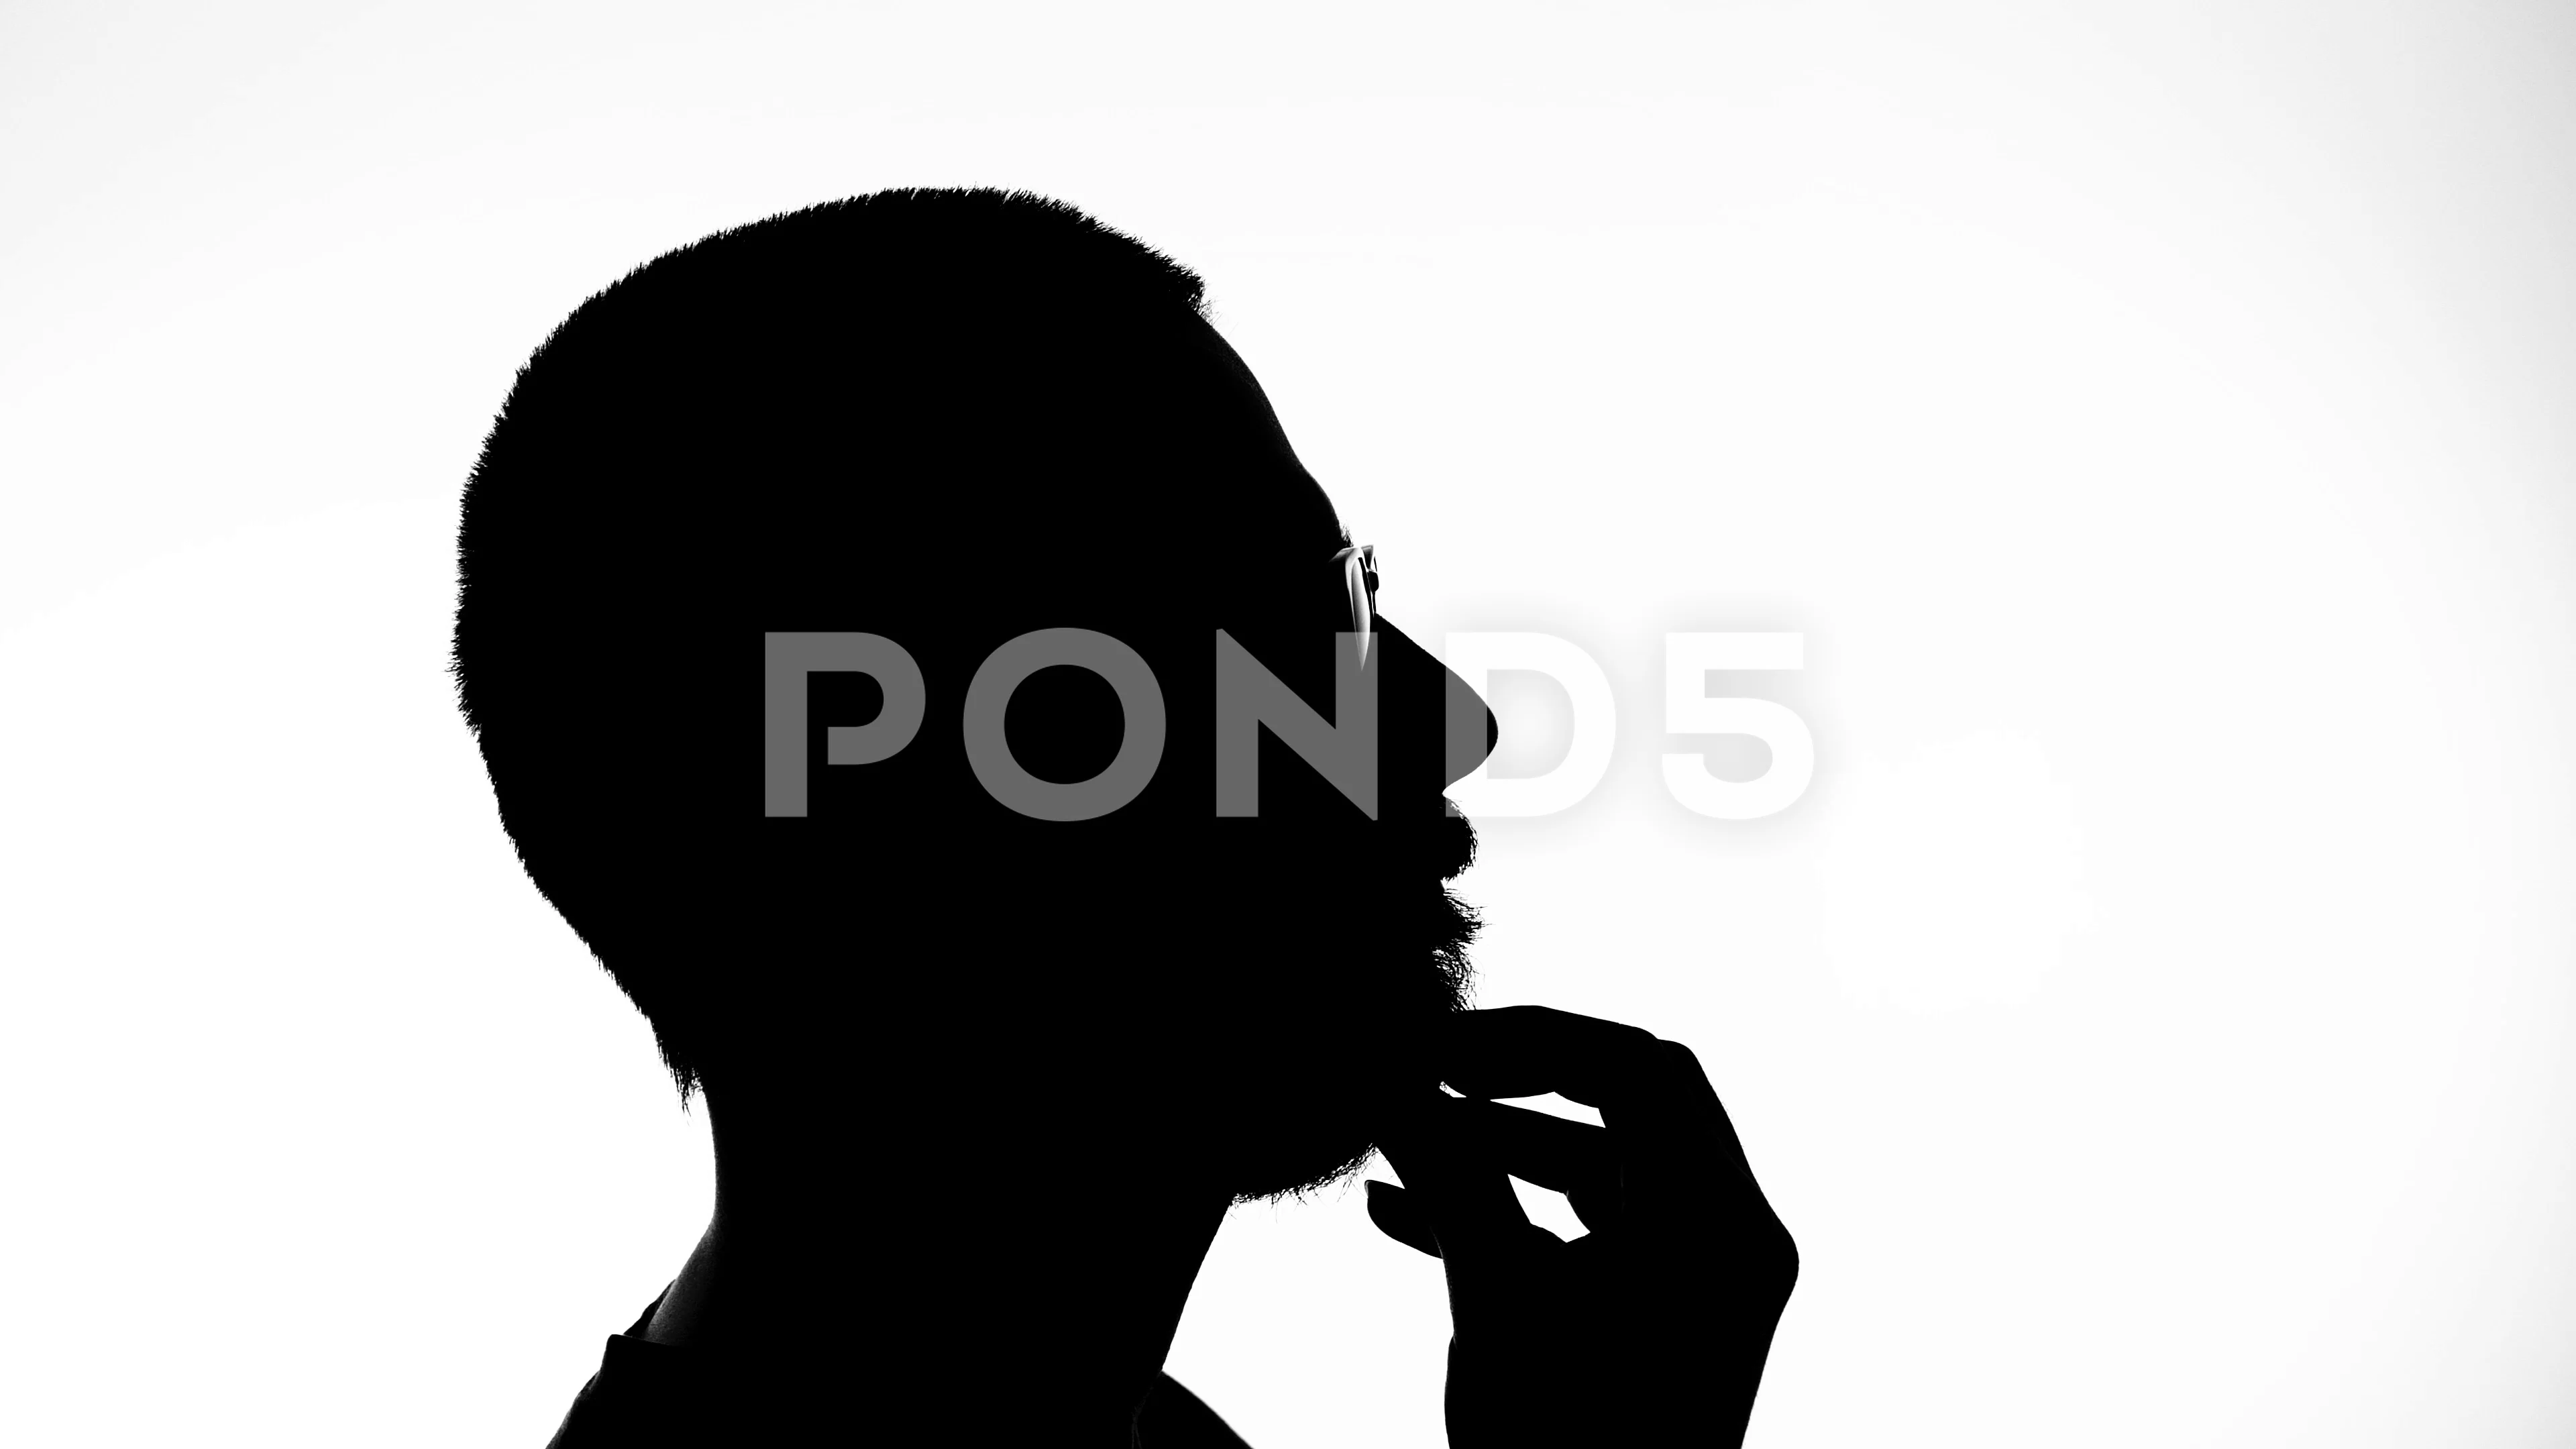 thinking person silhouette